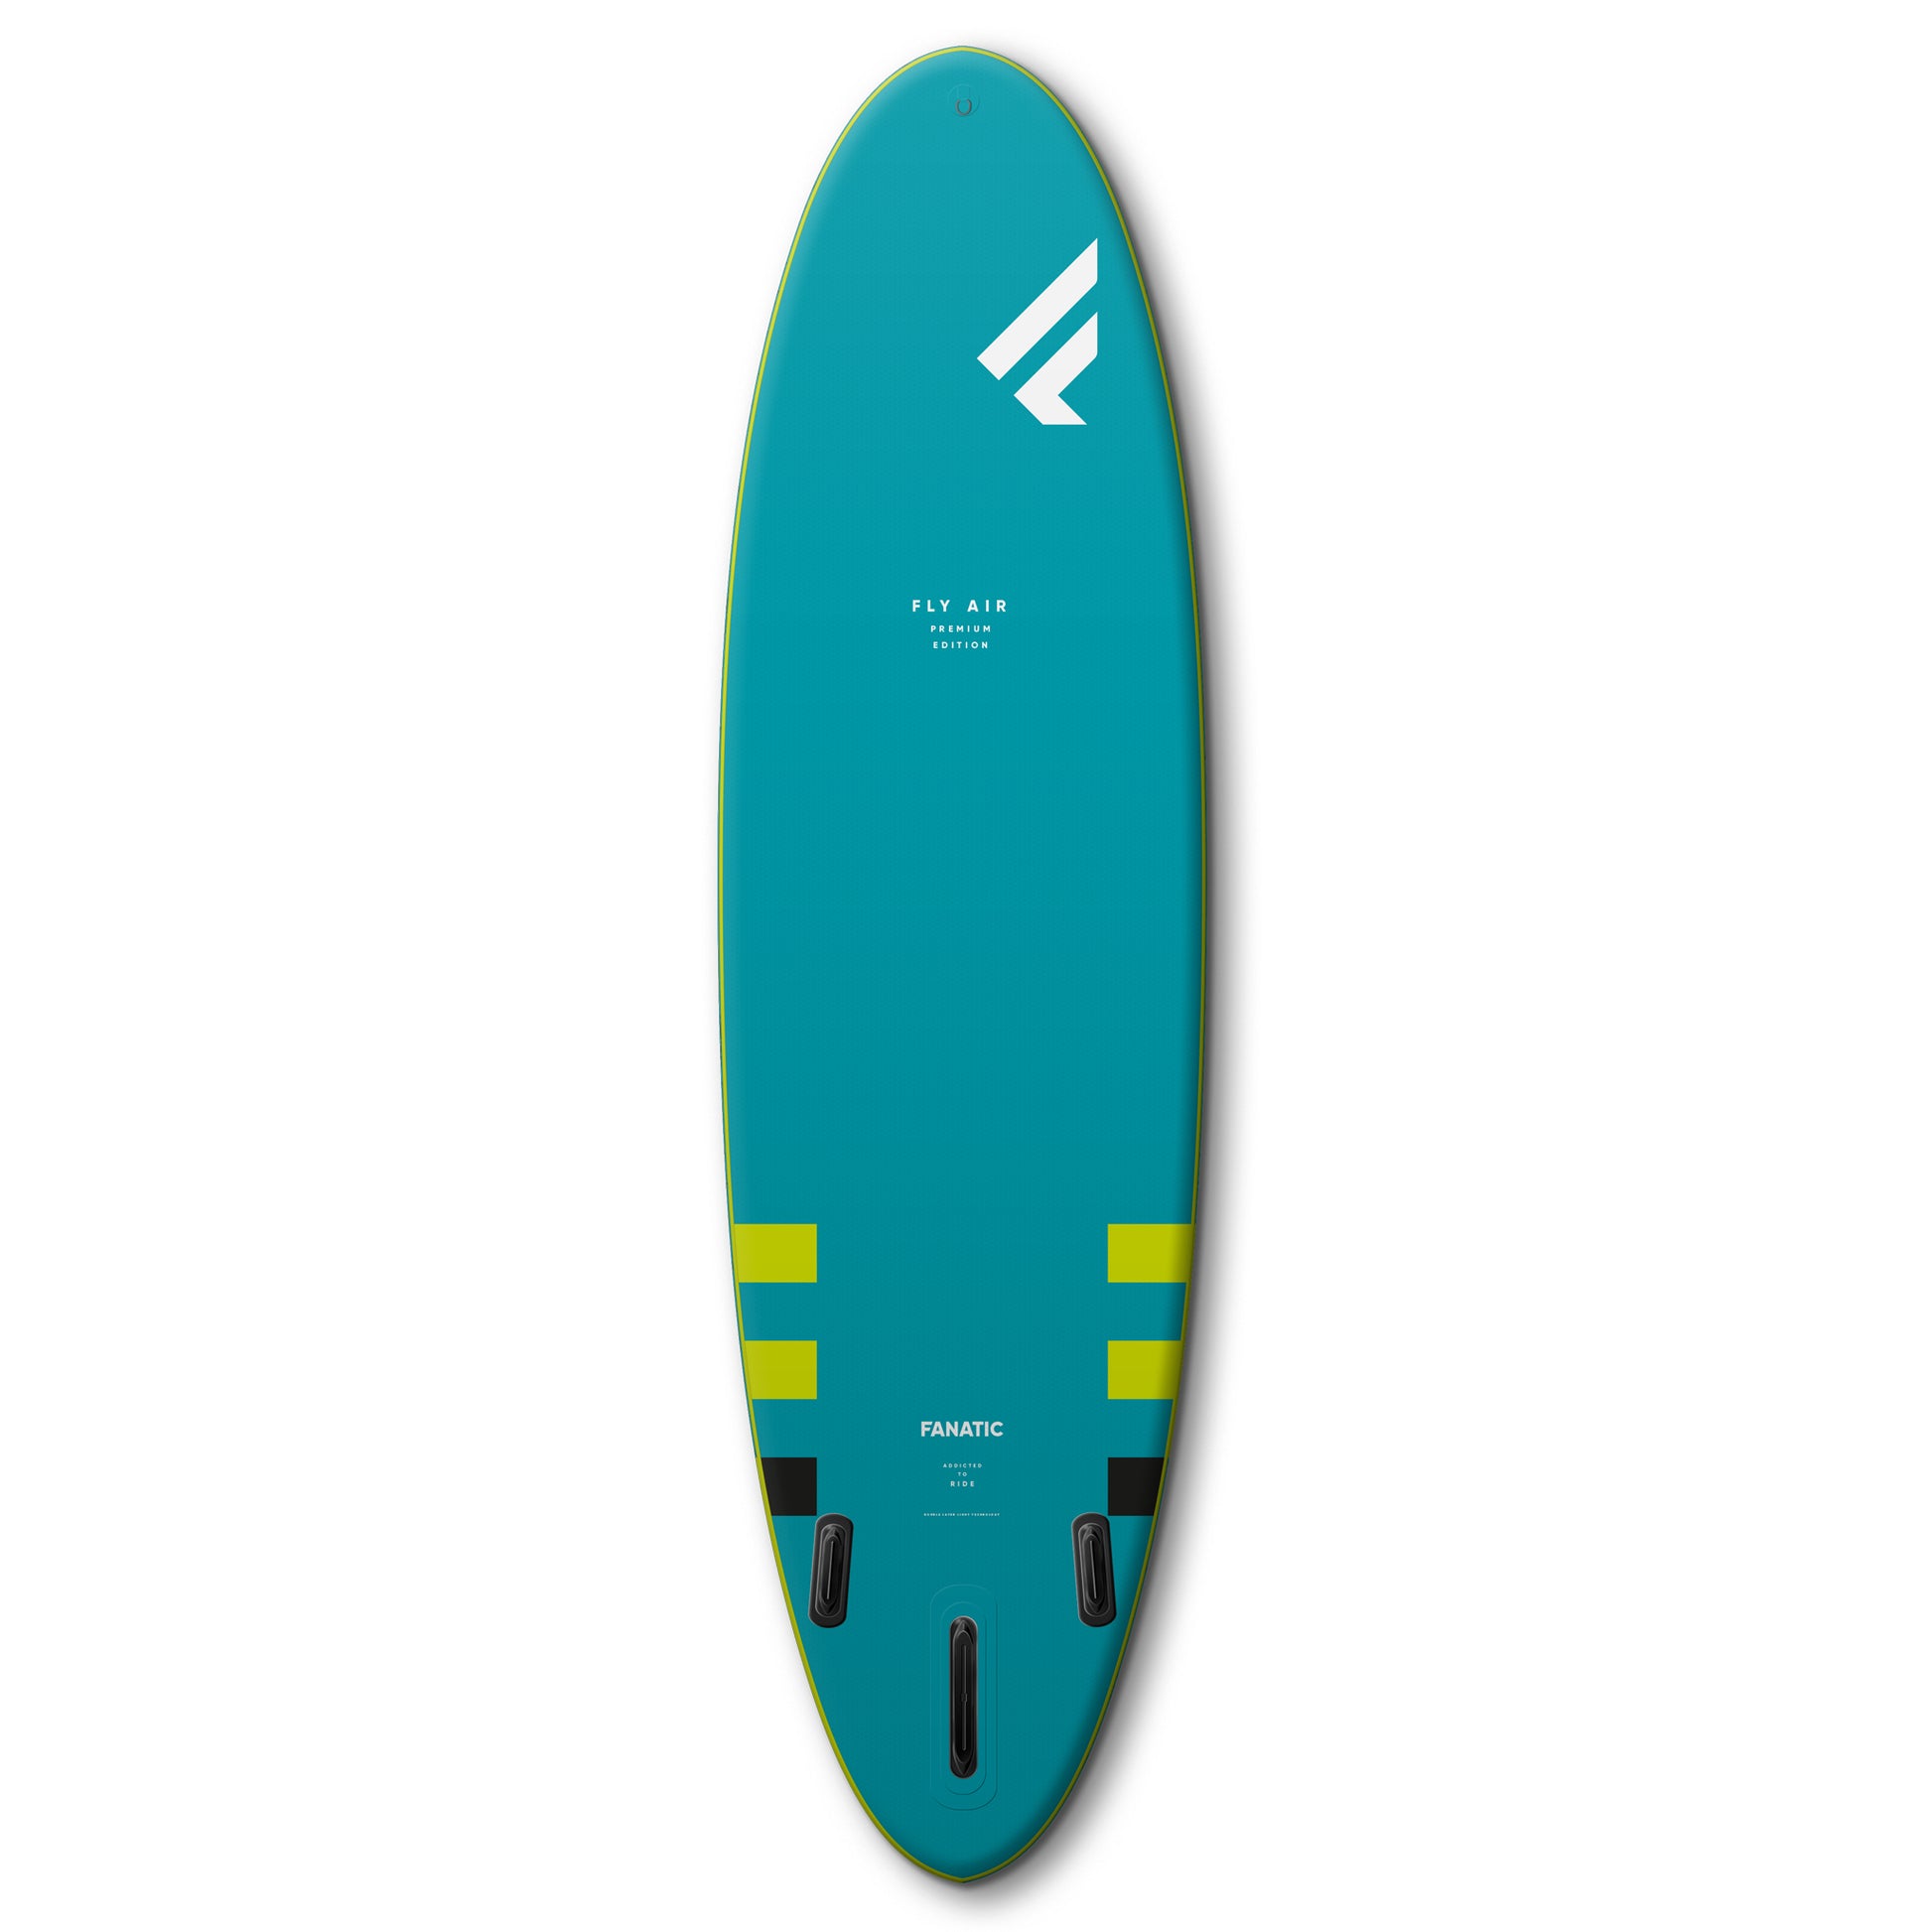 Fanatic iSUP Fly Air Premium – SUP Inflatable Board